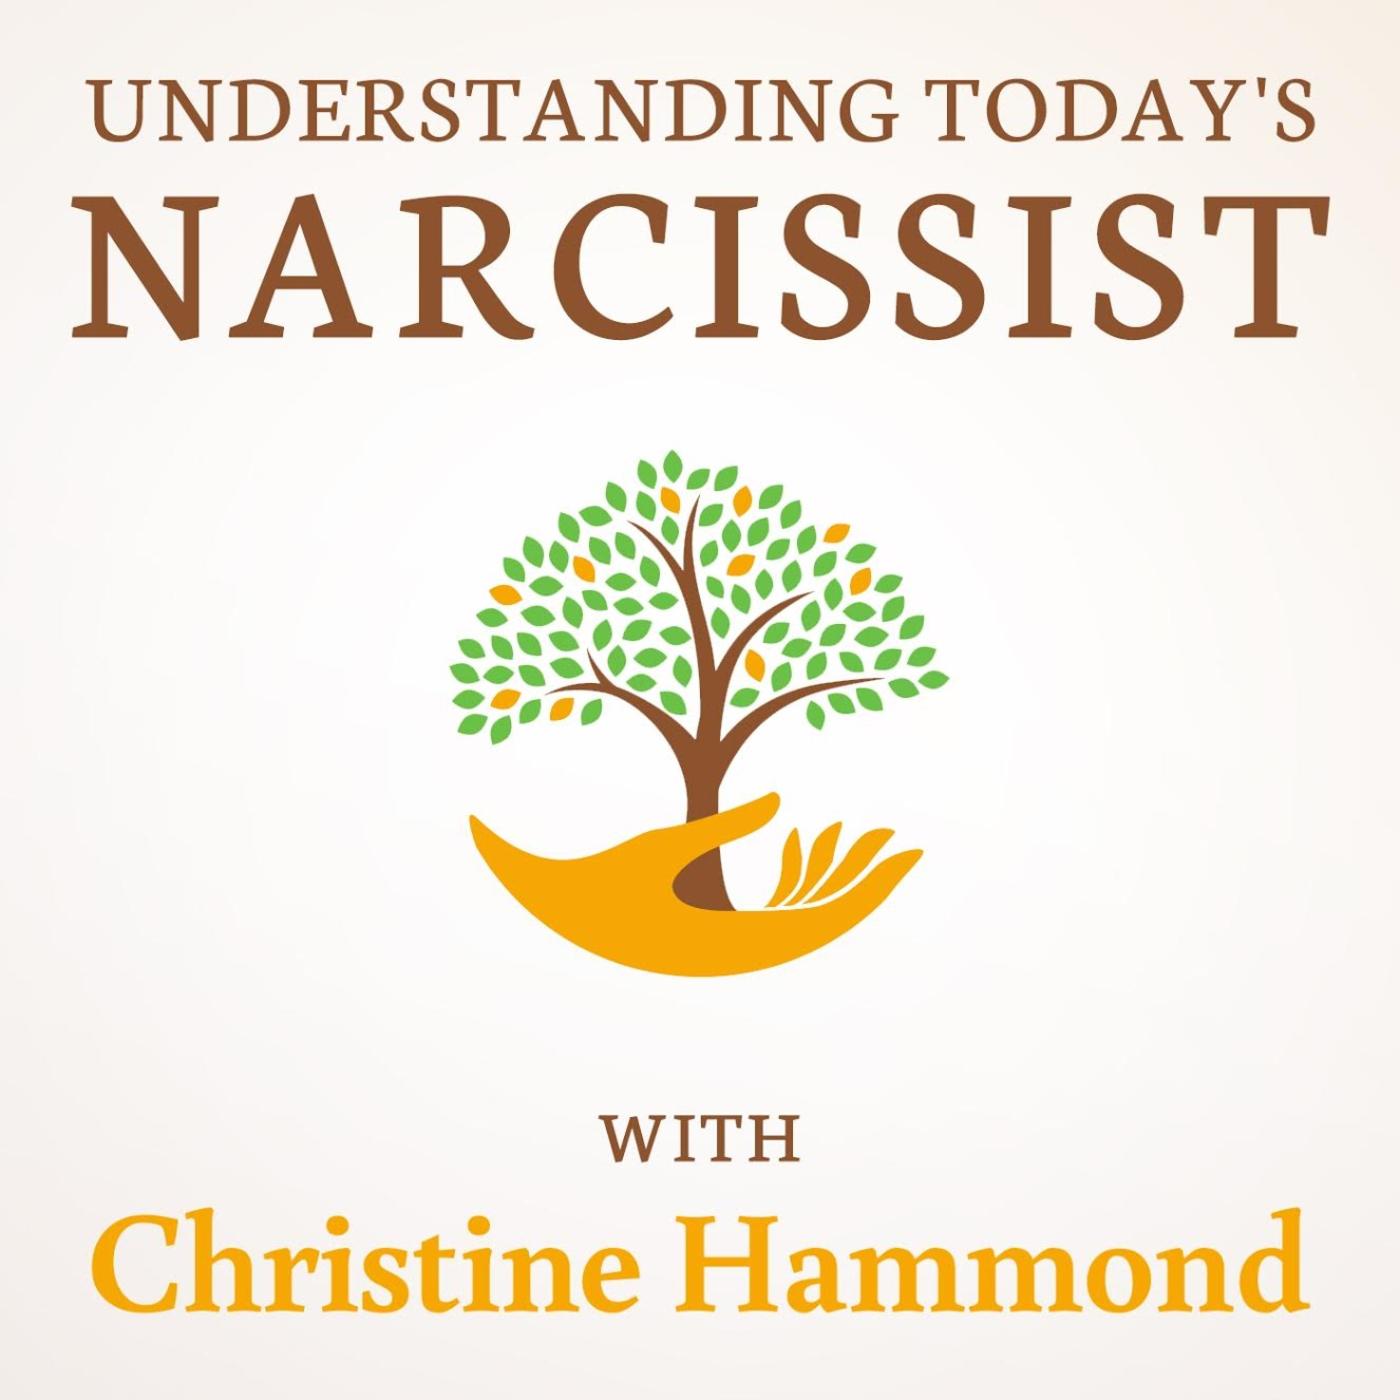 Part 2 of an interview with Dr. Nadine Macaluso, LMFT